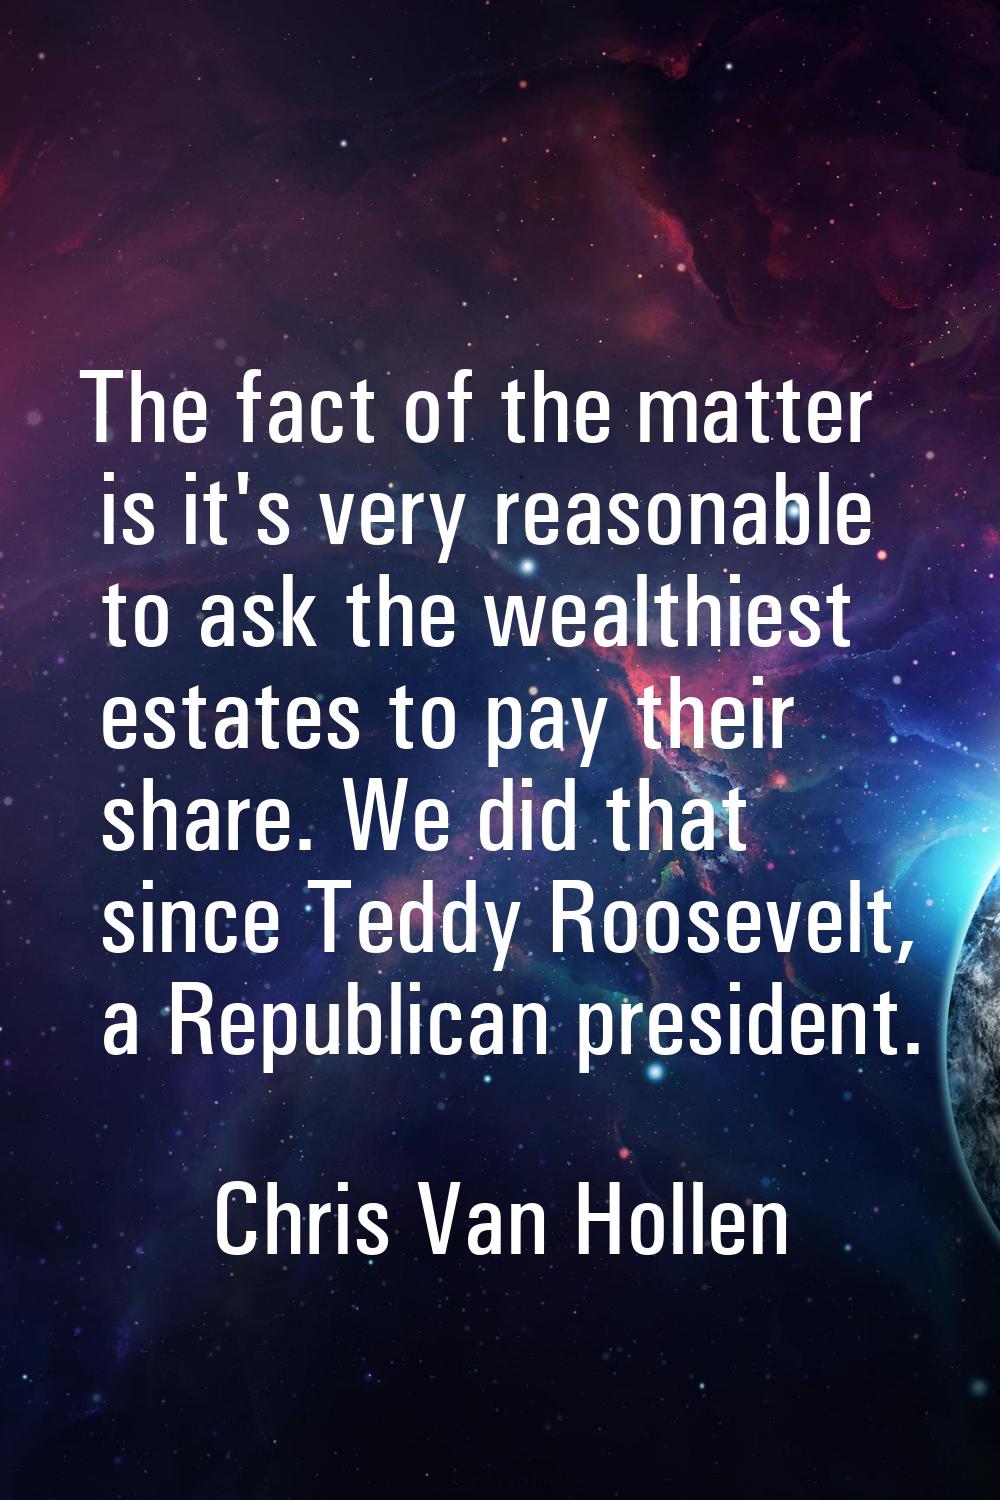 The fact of the matter is it's very reasonable to ask the wealthiest estates to pay their share. We